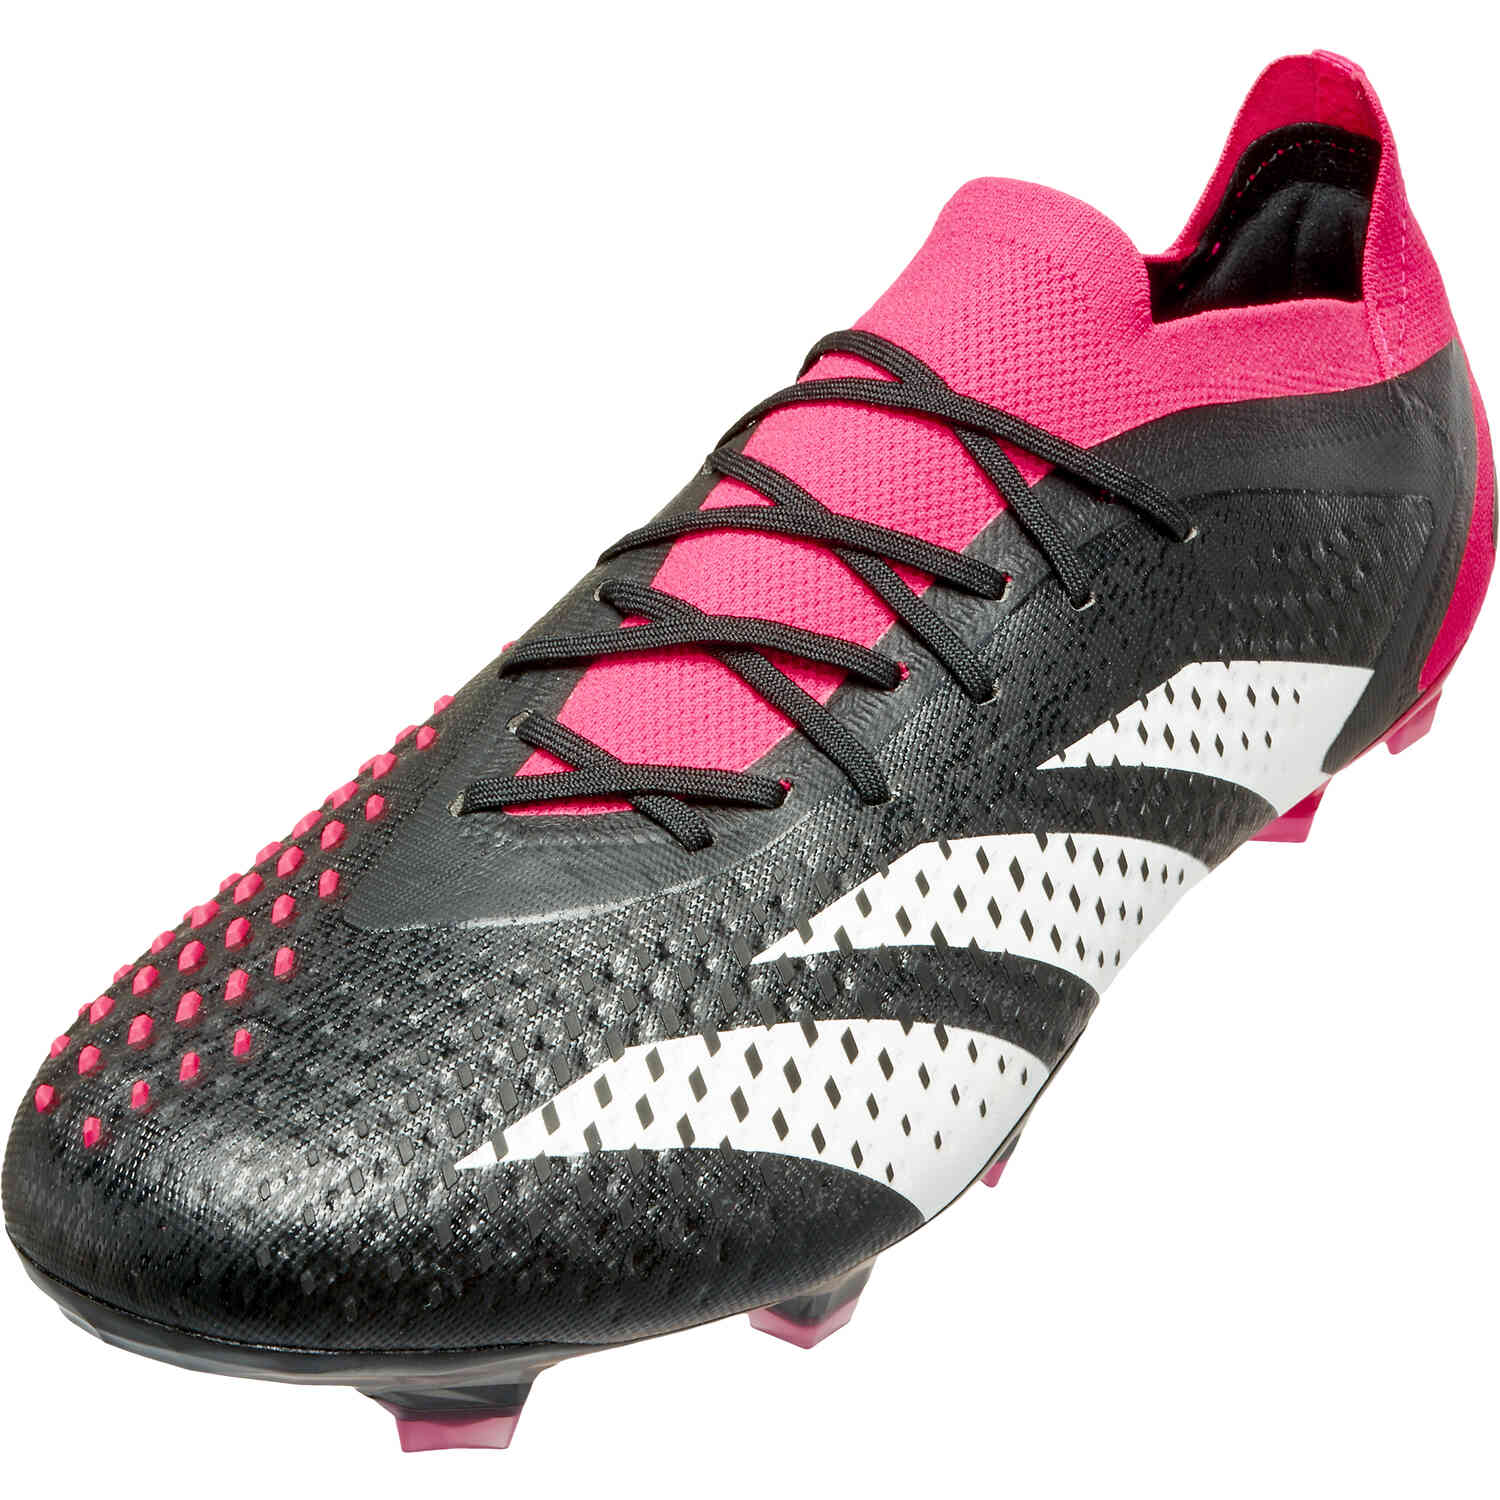 routine Emotie Perforeren adidas Low Cut Predator Accuracy.1 FG Firm Ground Soccer Cleats - Soccer  Master